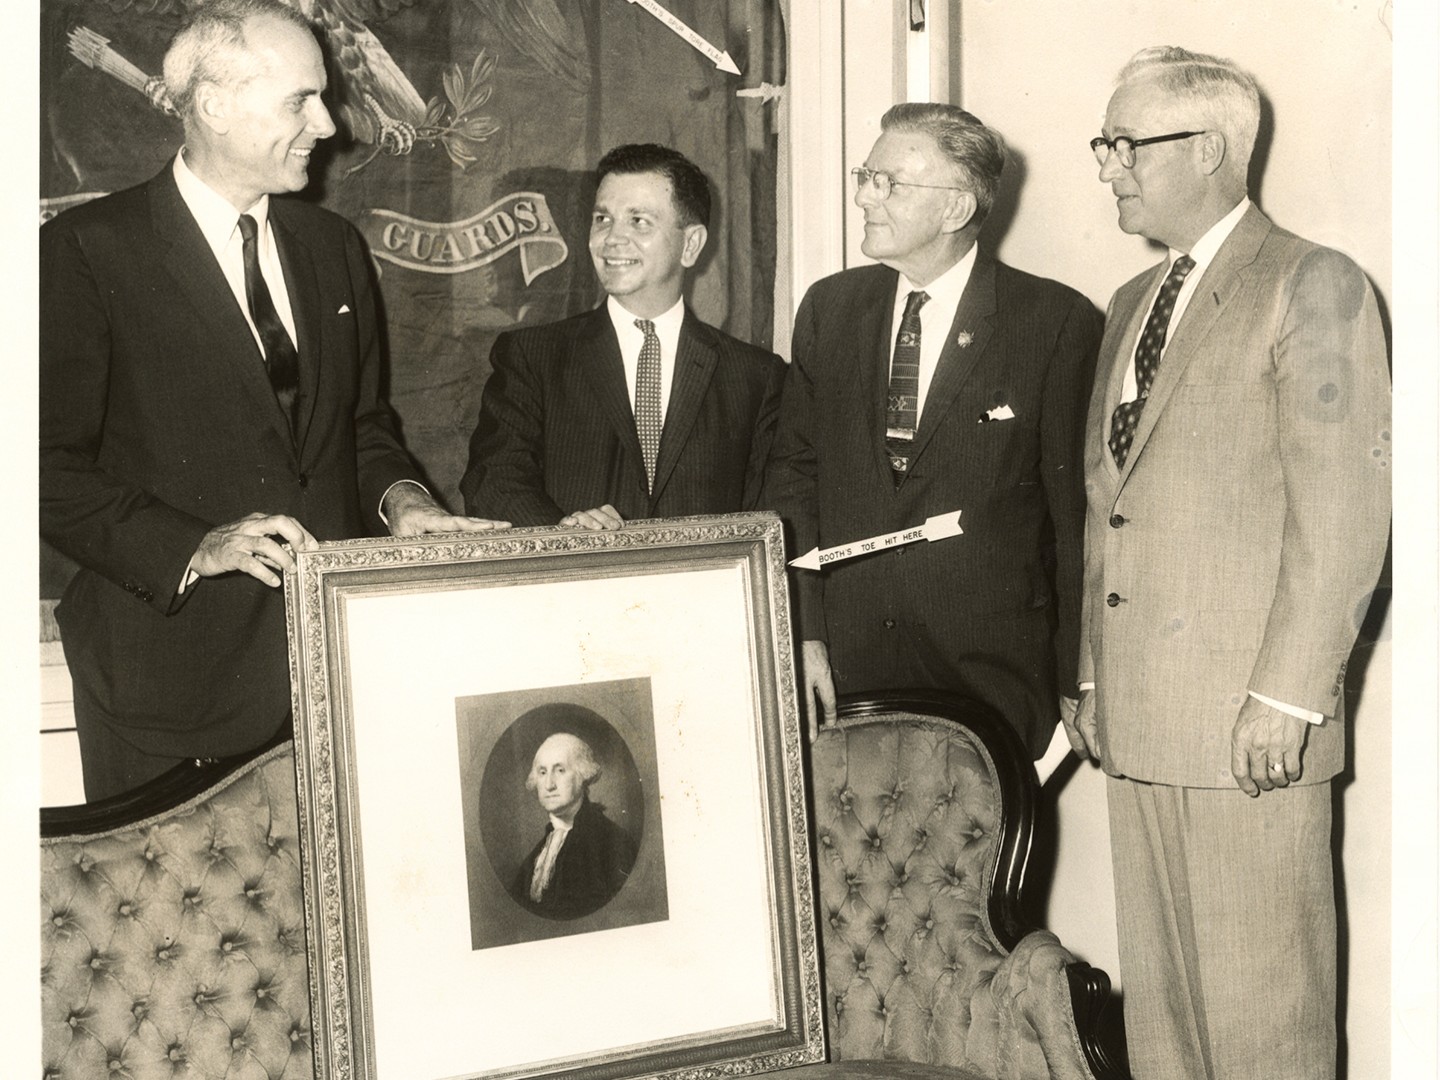 Photo from 1959 shows Addison Reece standing with three other men in business suits above the original George Washington portrait, the sofa from the Presidential Box. Behind them is the original blur Treasury Flag from Ford's.